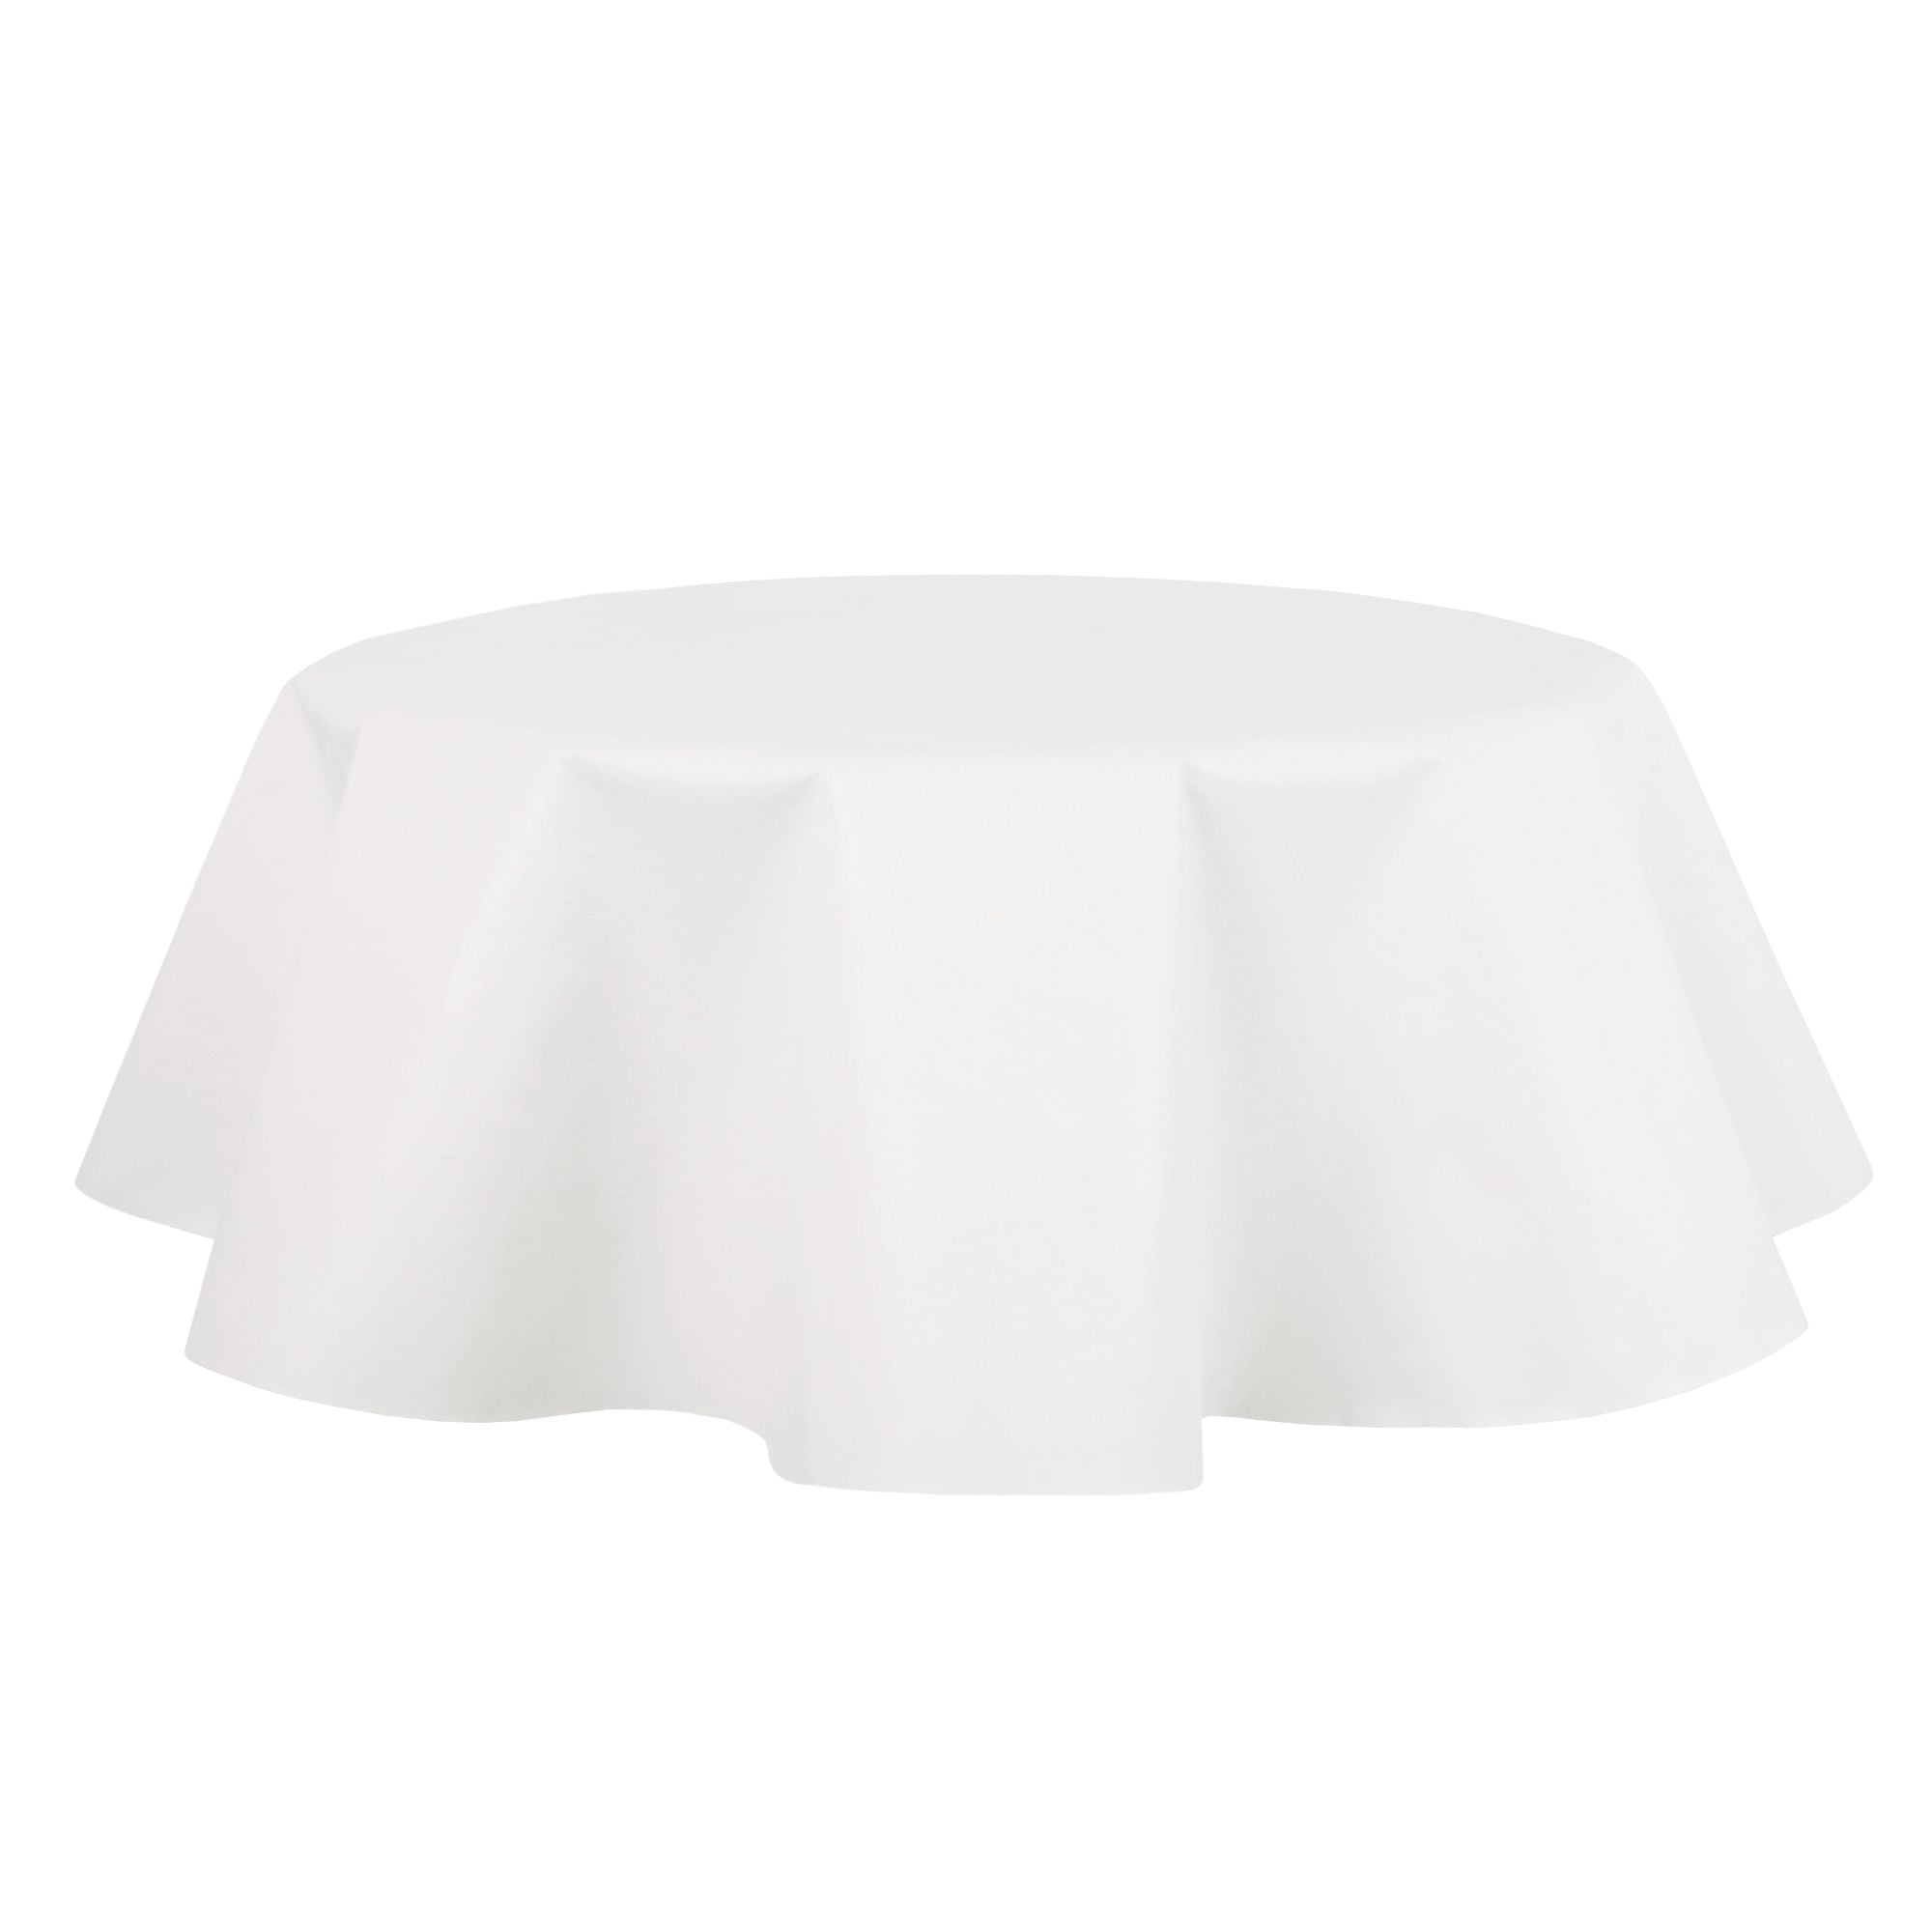 Mainstays PEVA Table Pad, White, 70" Round, Available in various sizes